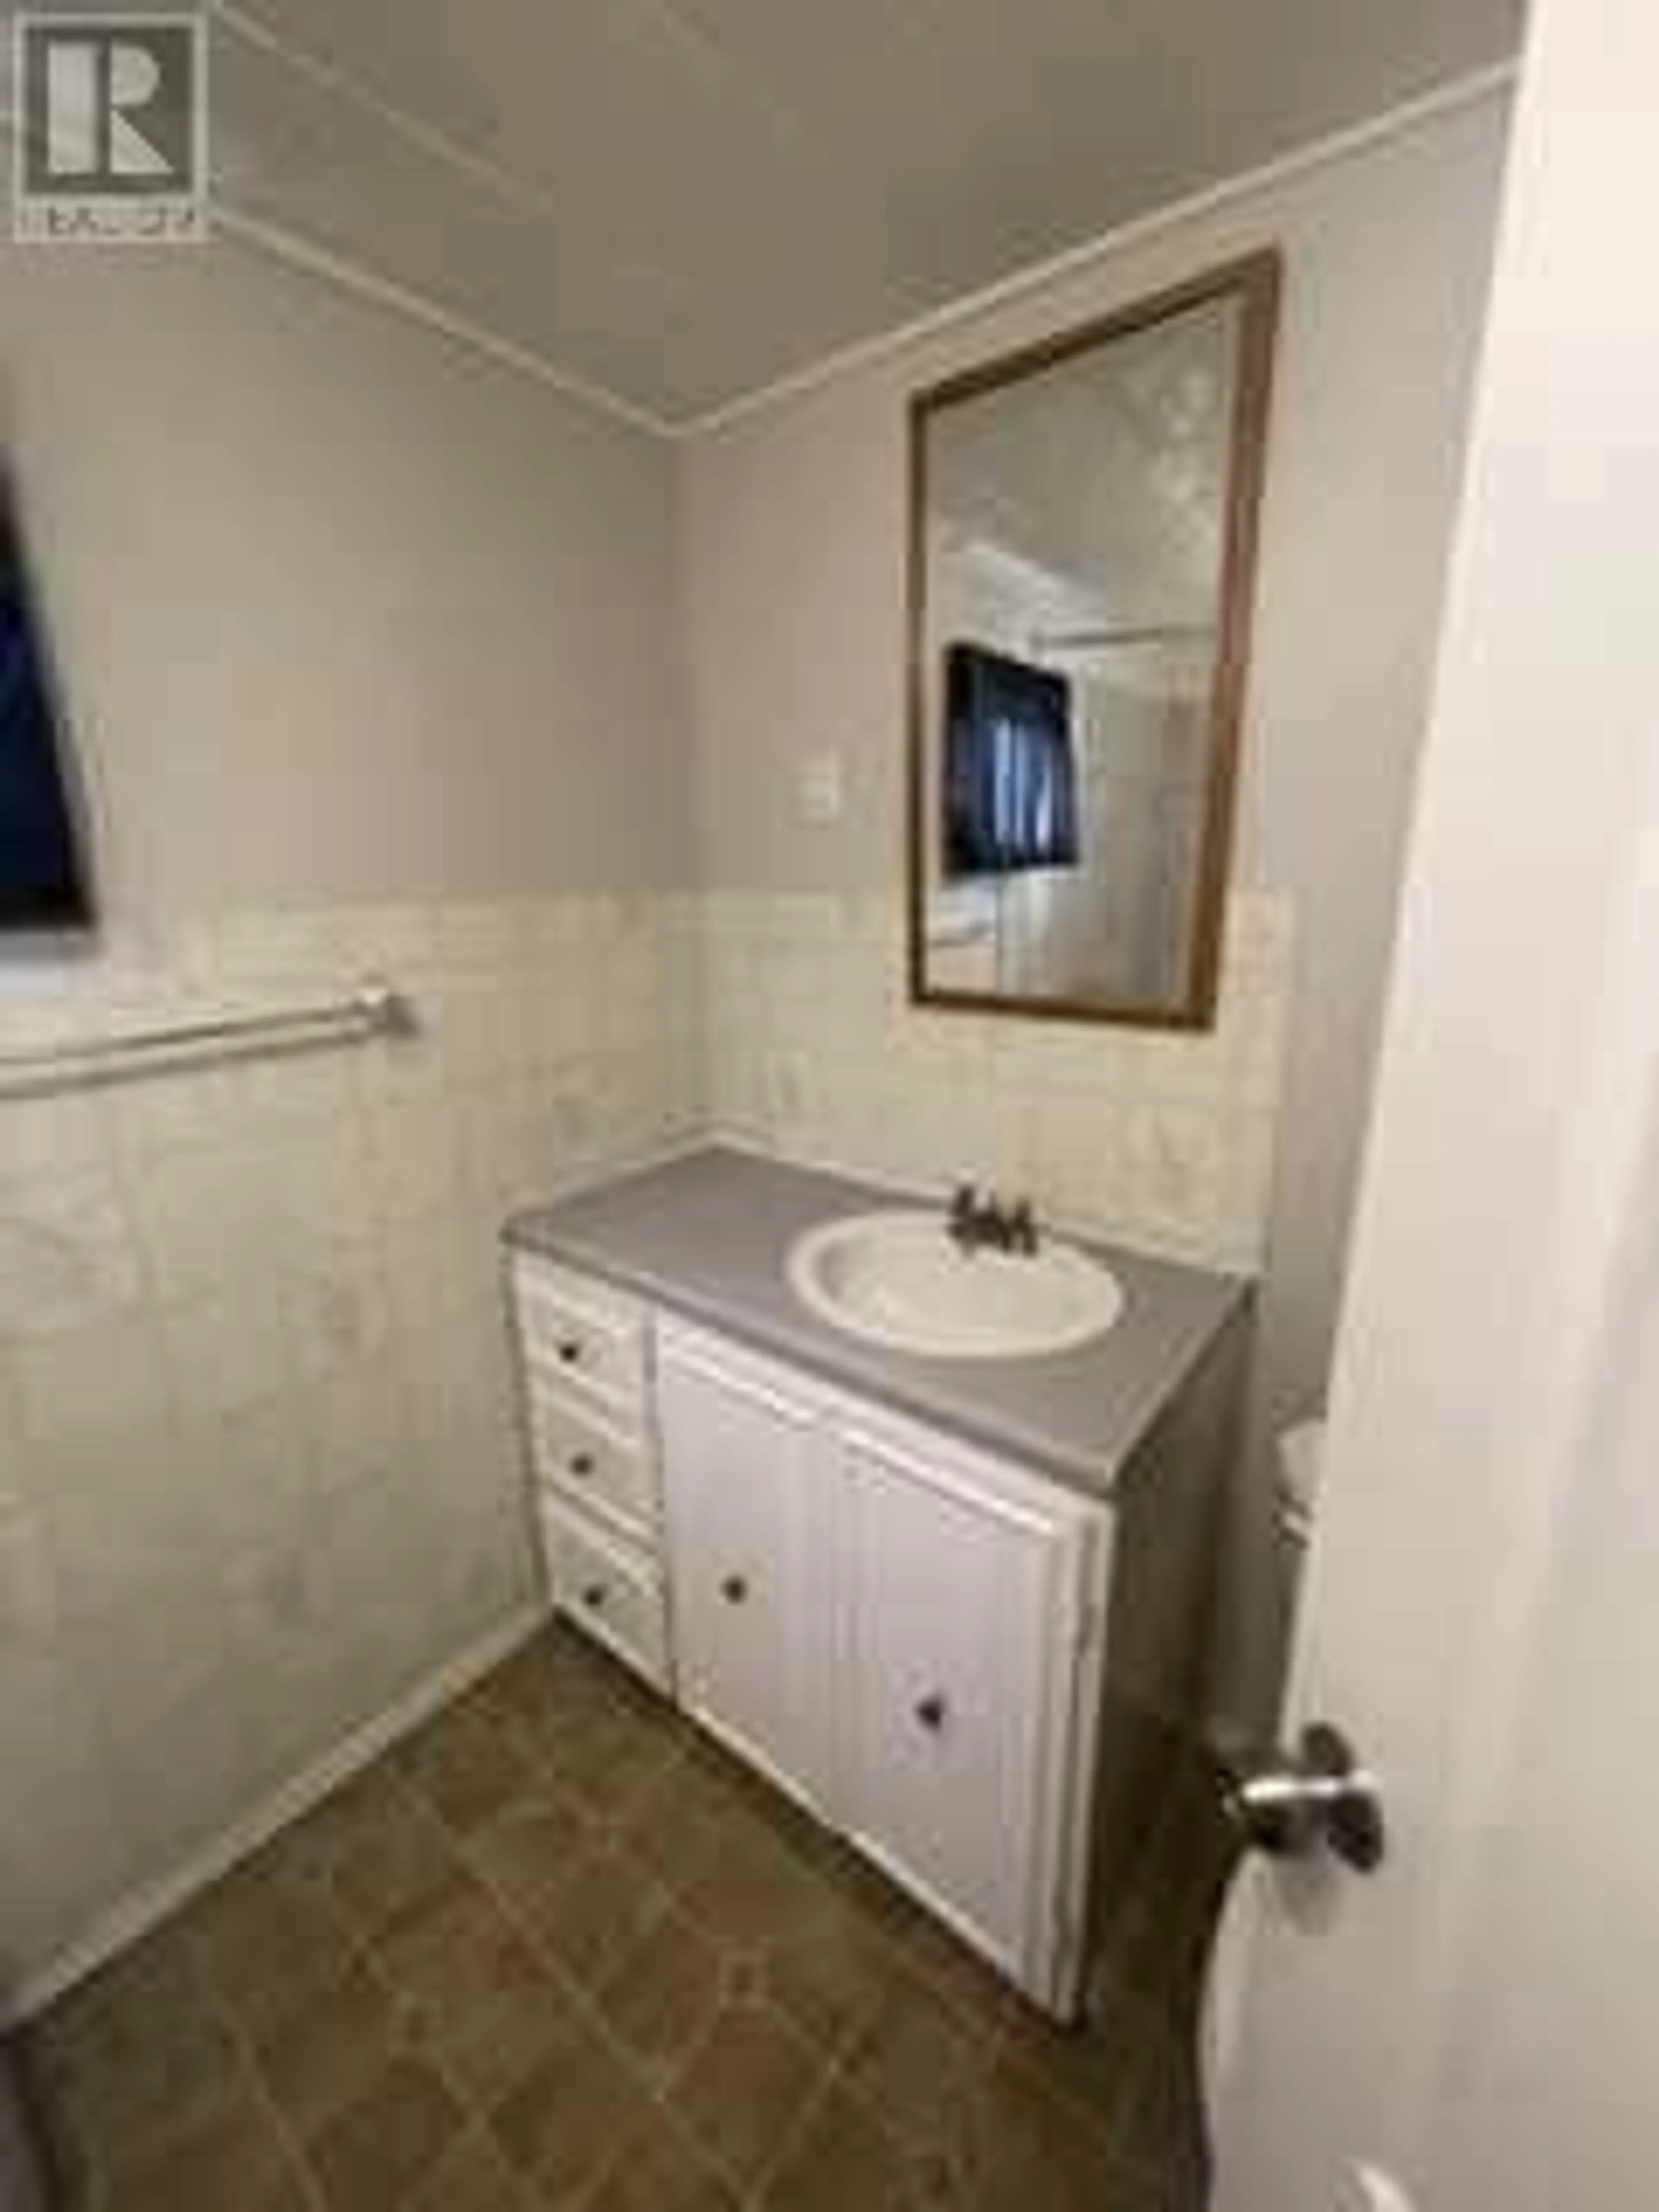 Bathroom for 216 Grenfell Crescent, Fort McMurray Alberta T9H2M6